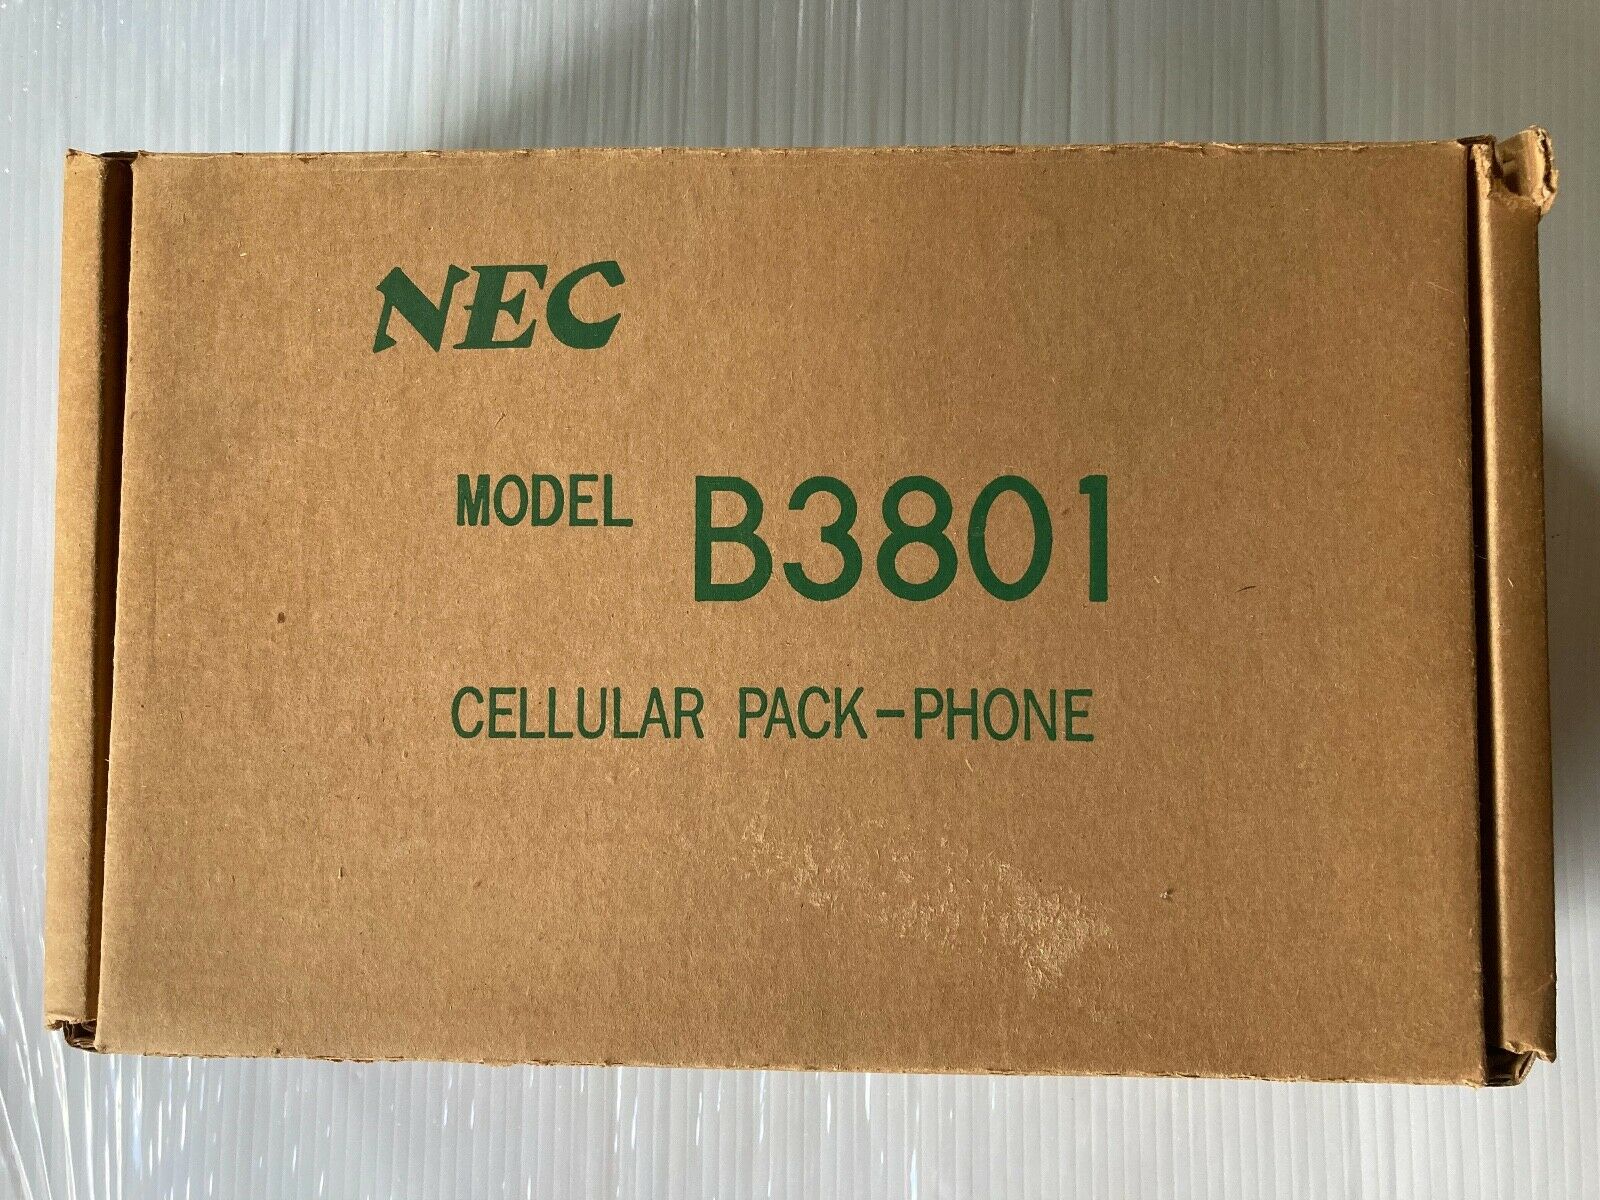 Rare And Vintage Nec B3801 Mobil Phone With Case, Manuals And Accessories